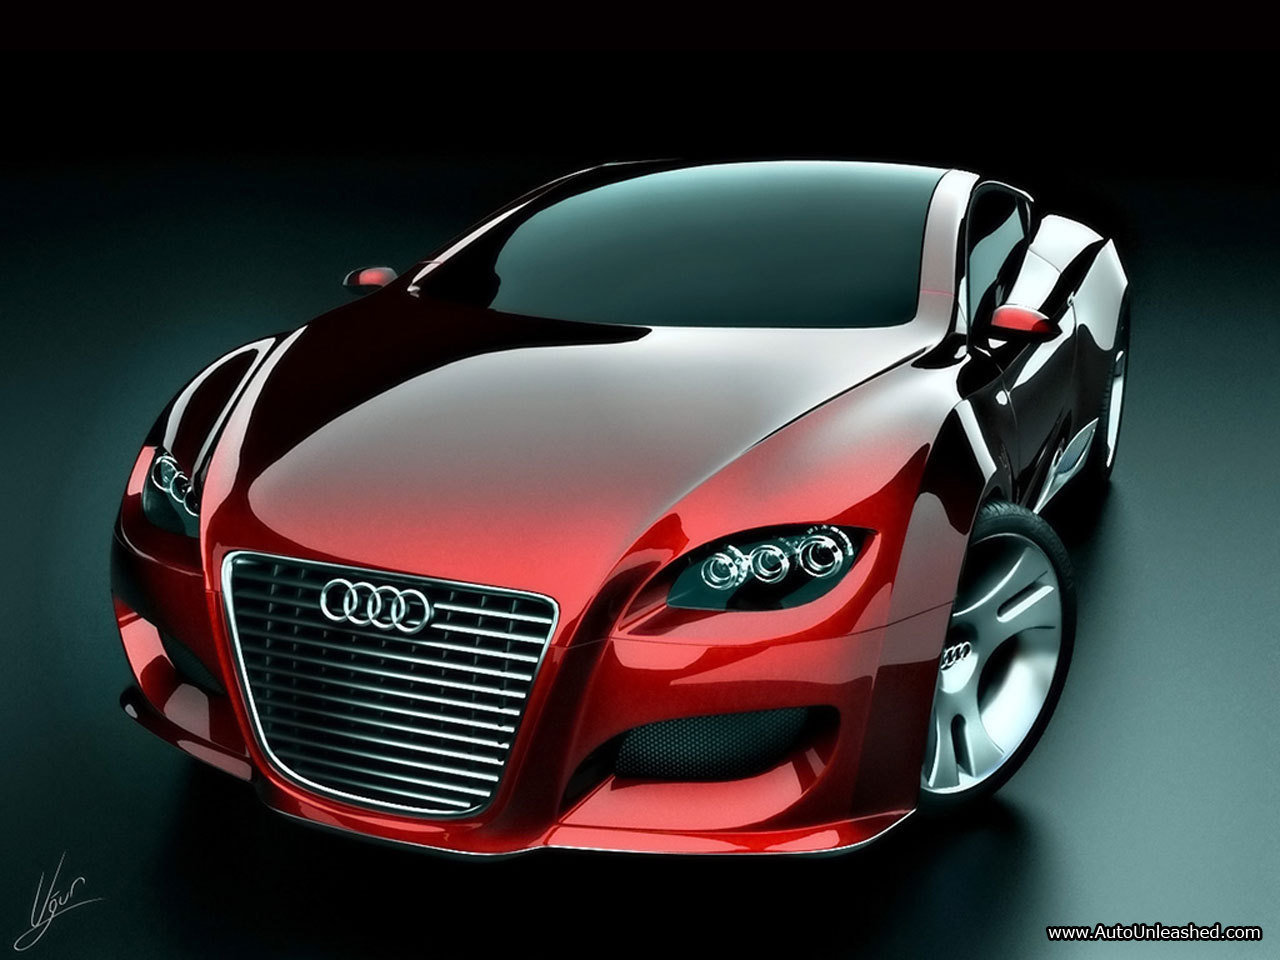 Cool Cars and Fast Cars: Audi Cars Wallpapers